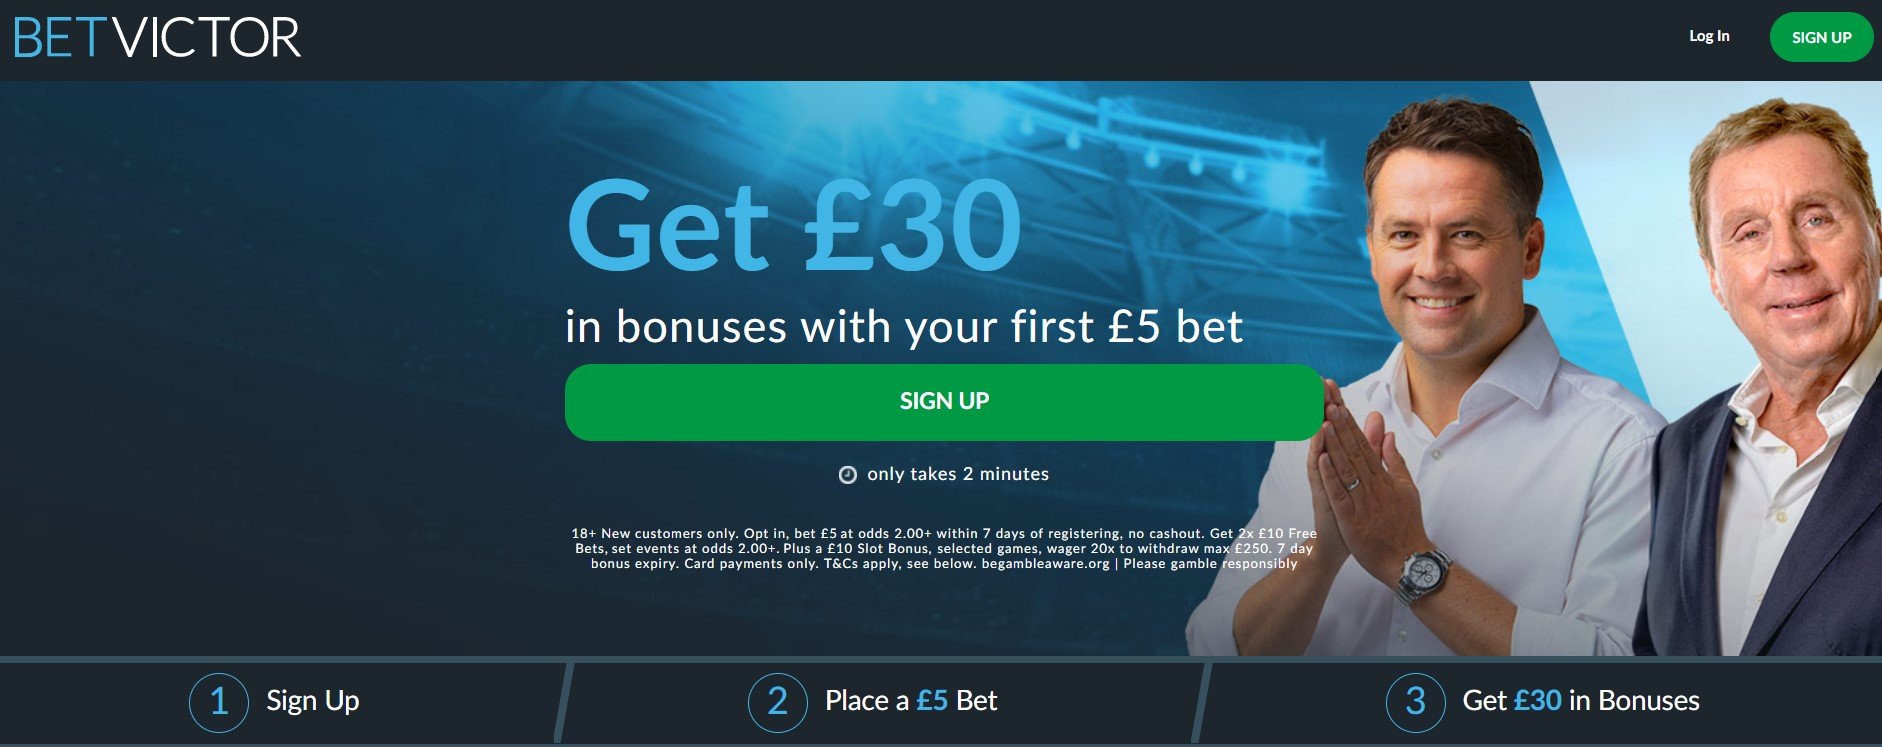 BetVictor welcome offer bet 5 get 30